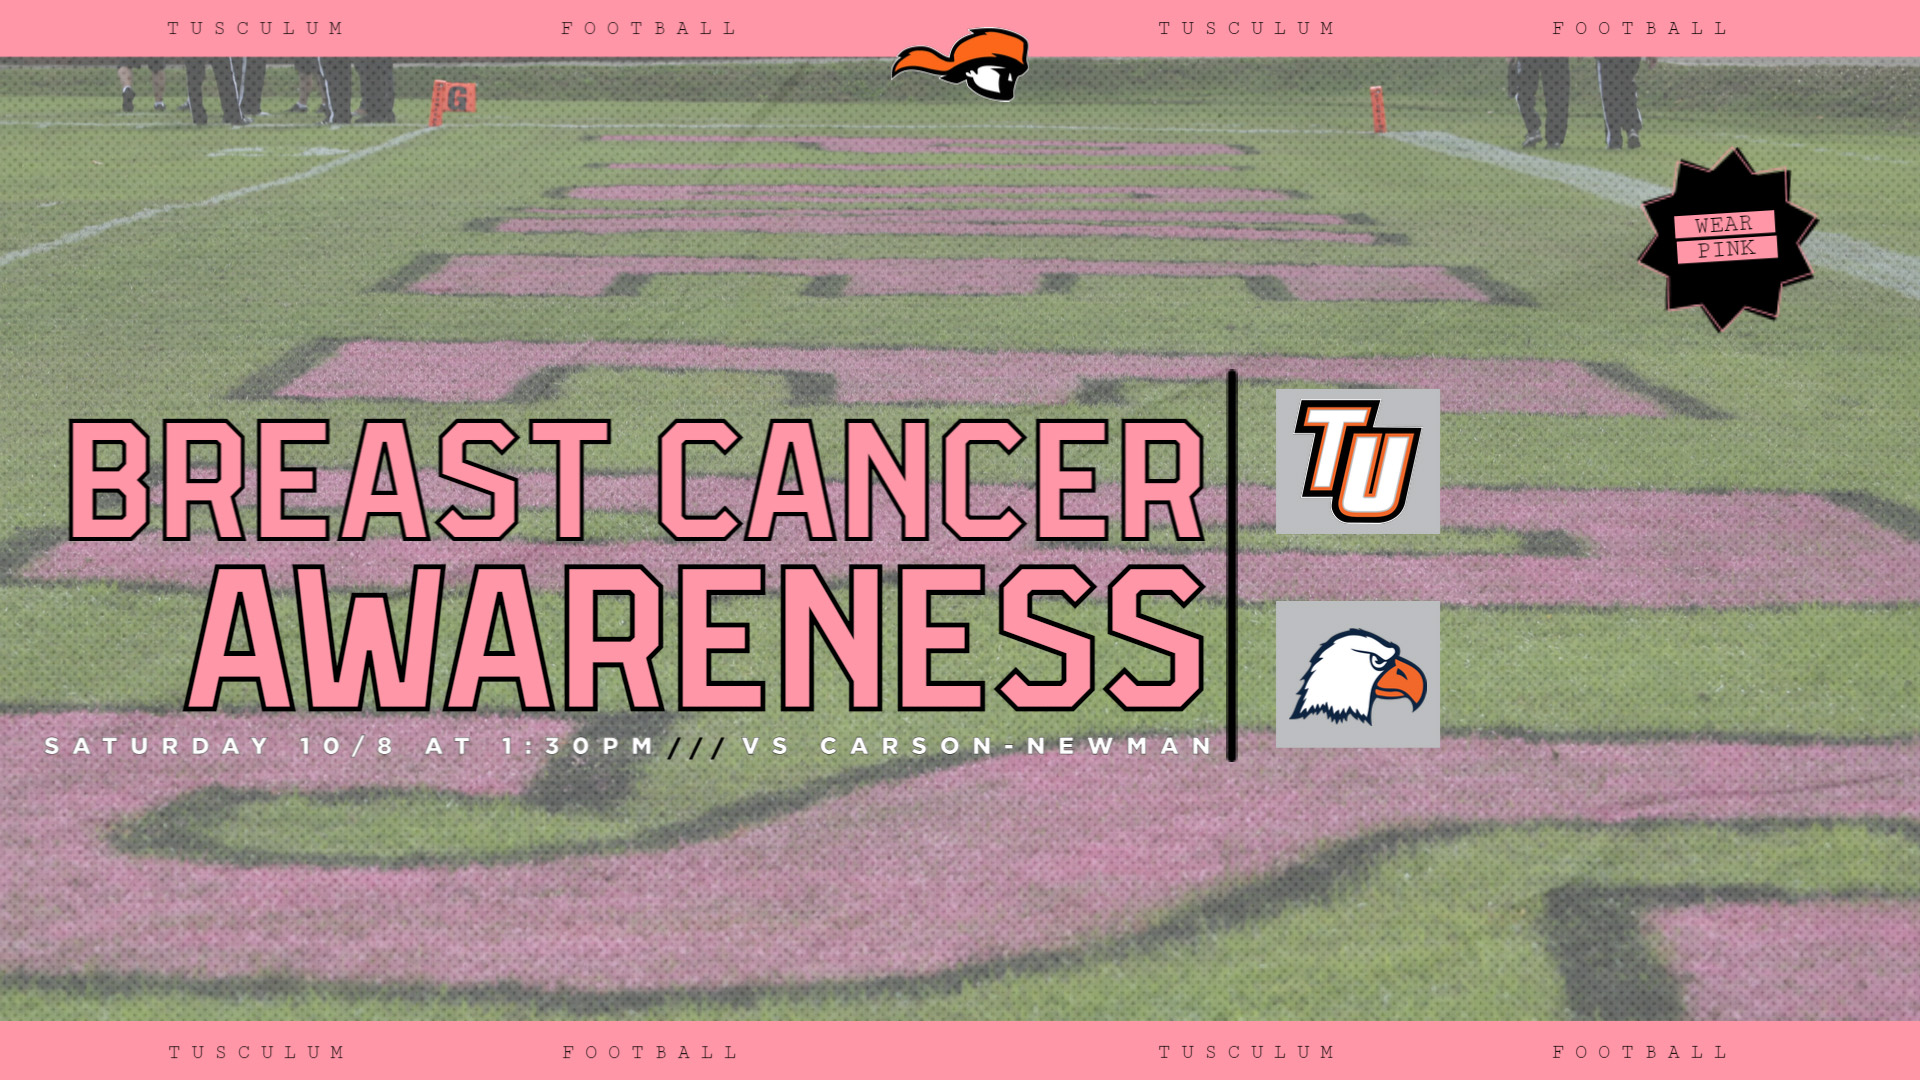 Tusculum hosts Breast Cancer Awareness game this Saturday